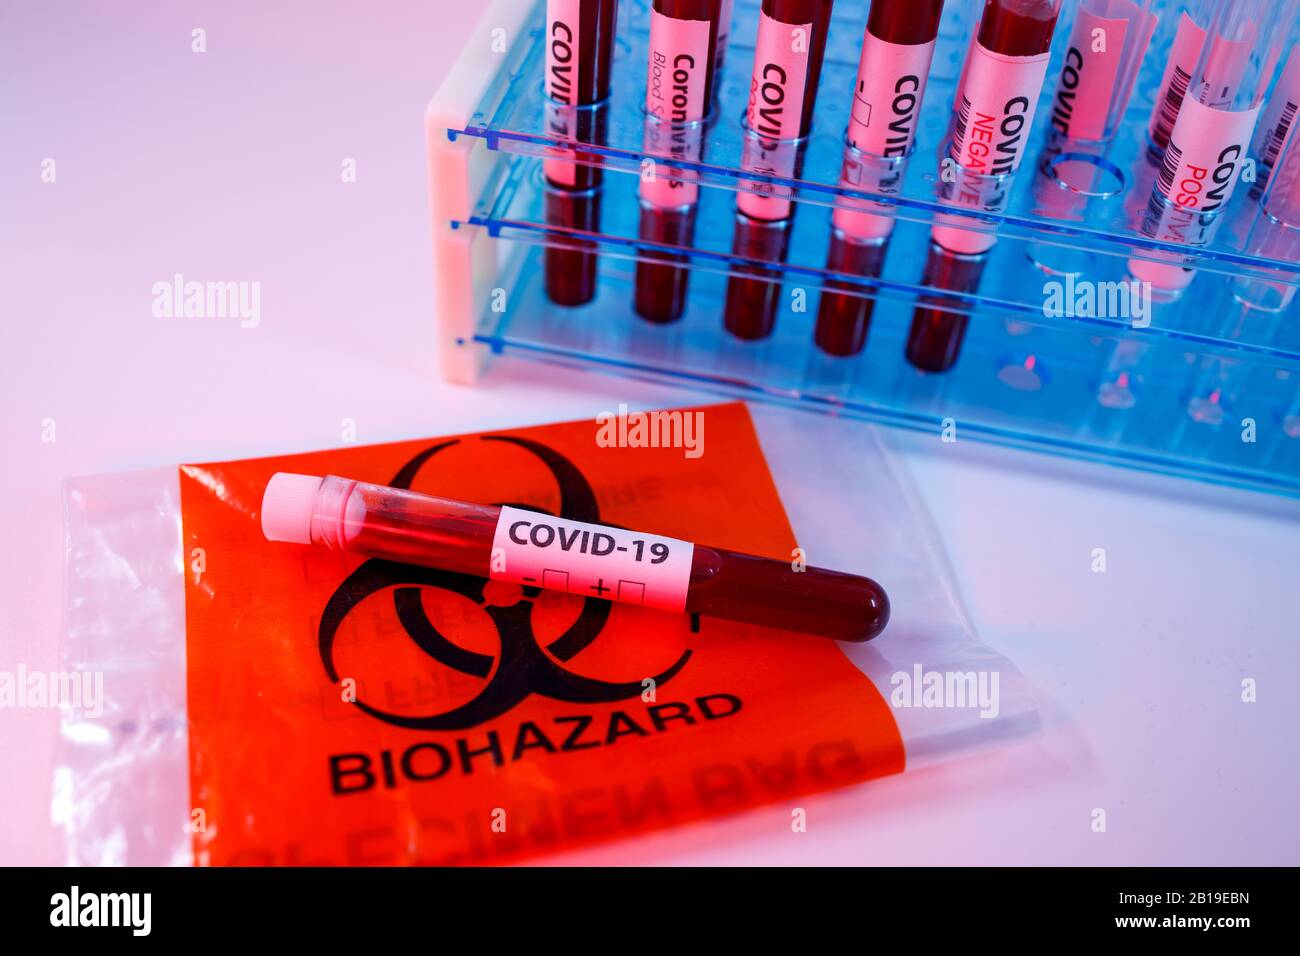 Blood sample for the rapidly spreading Coronavirus that originated in Wuhan. Test tube on an empty test request form for covid-19, biohazard transport Stock Photo